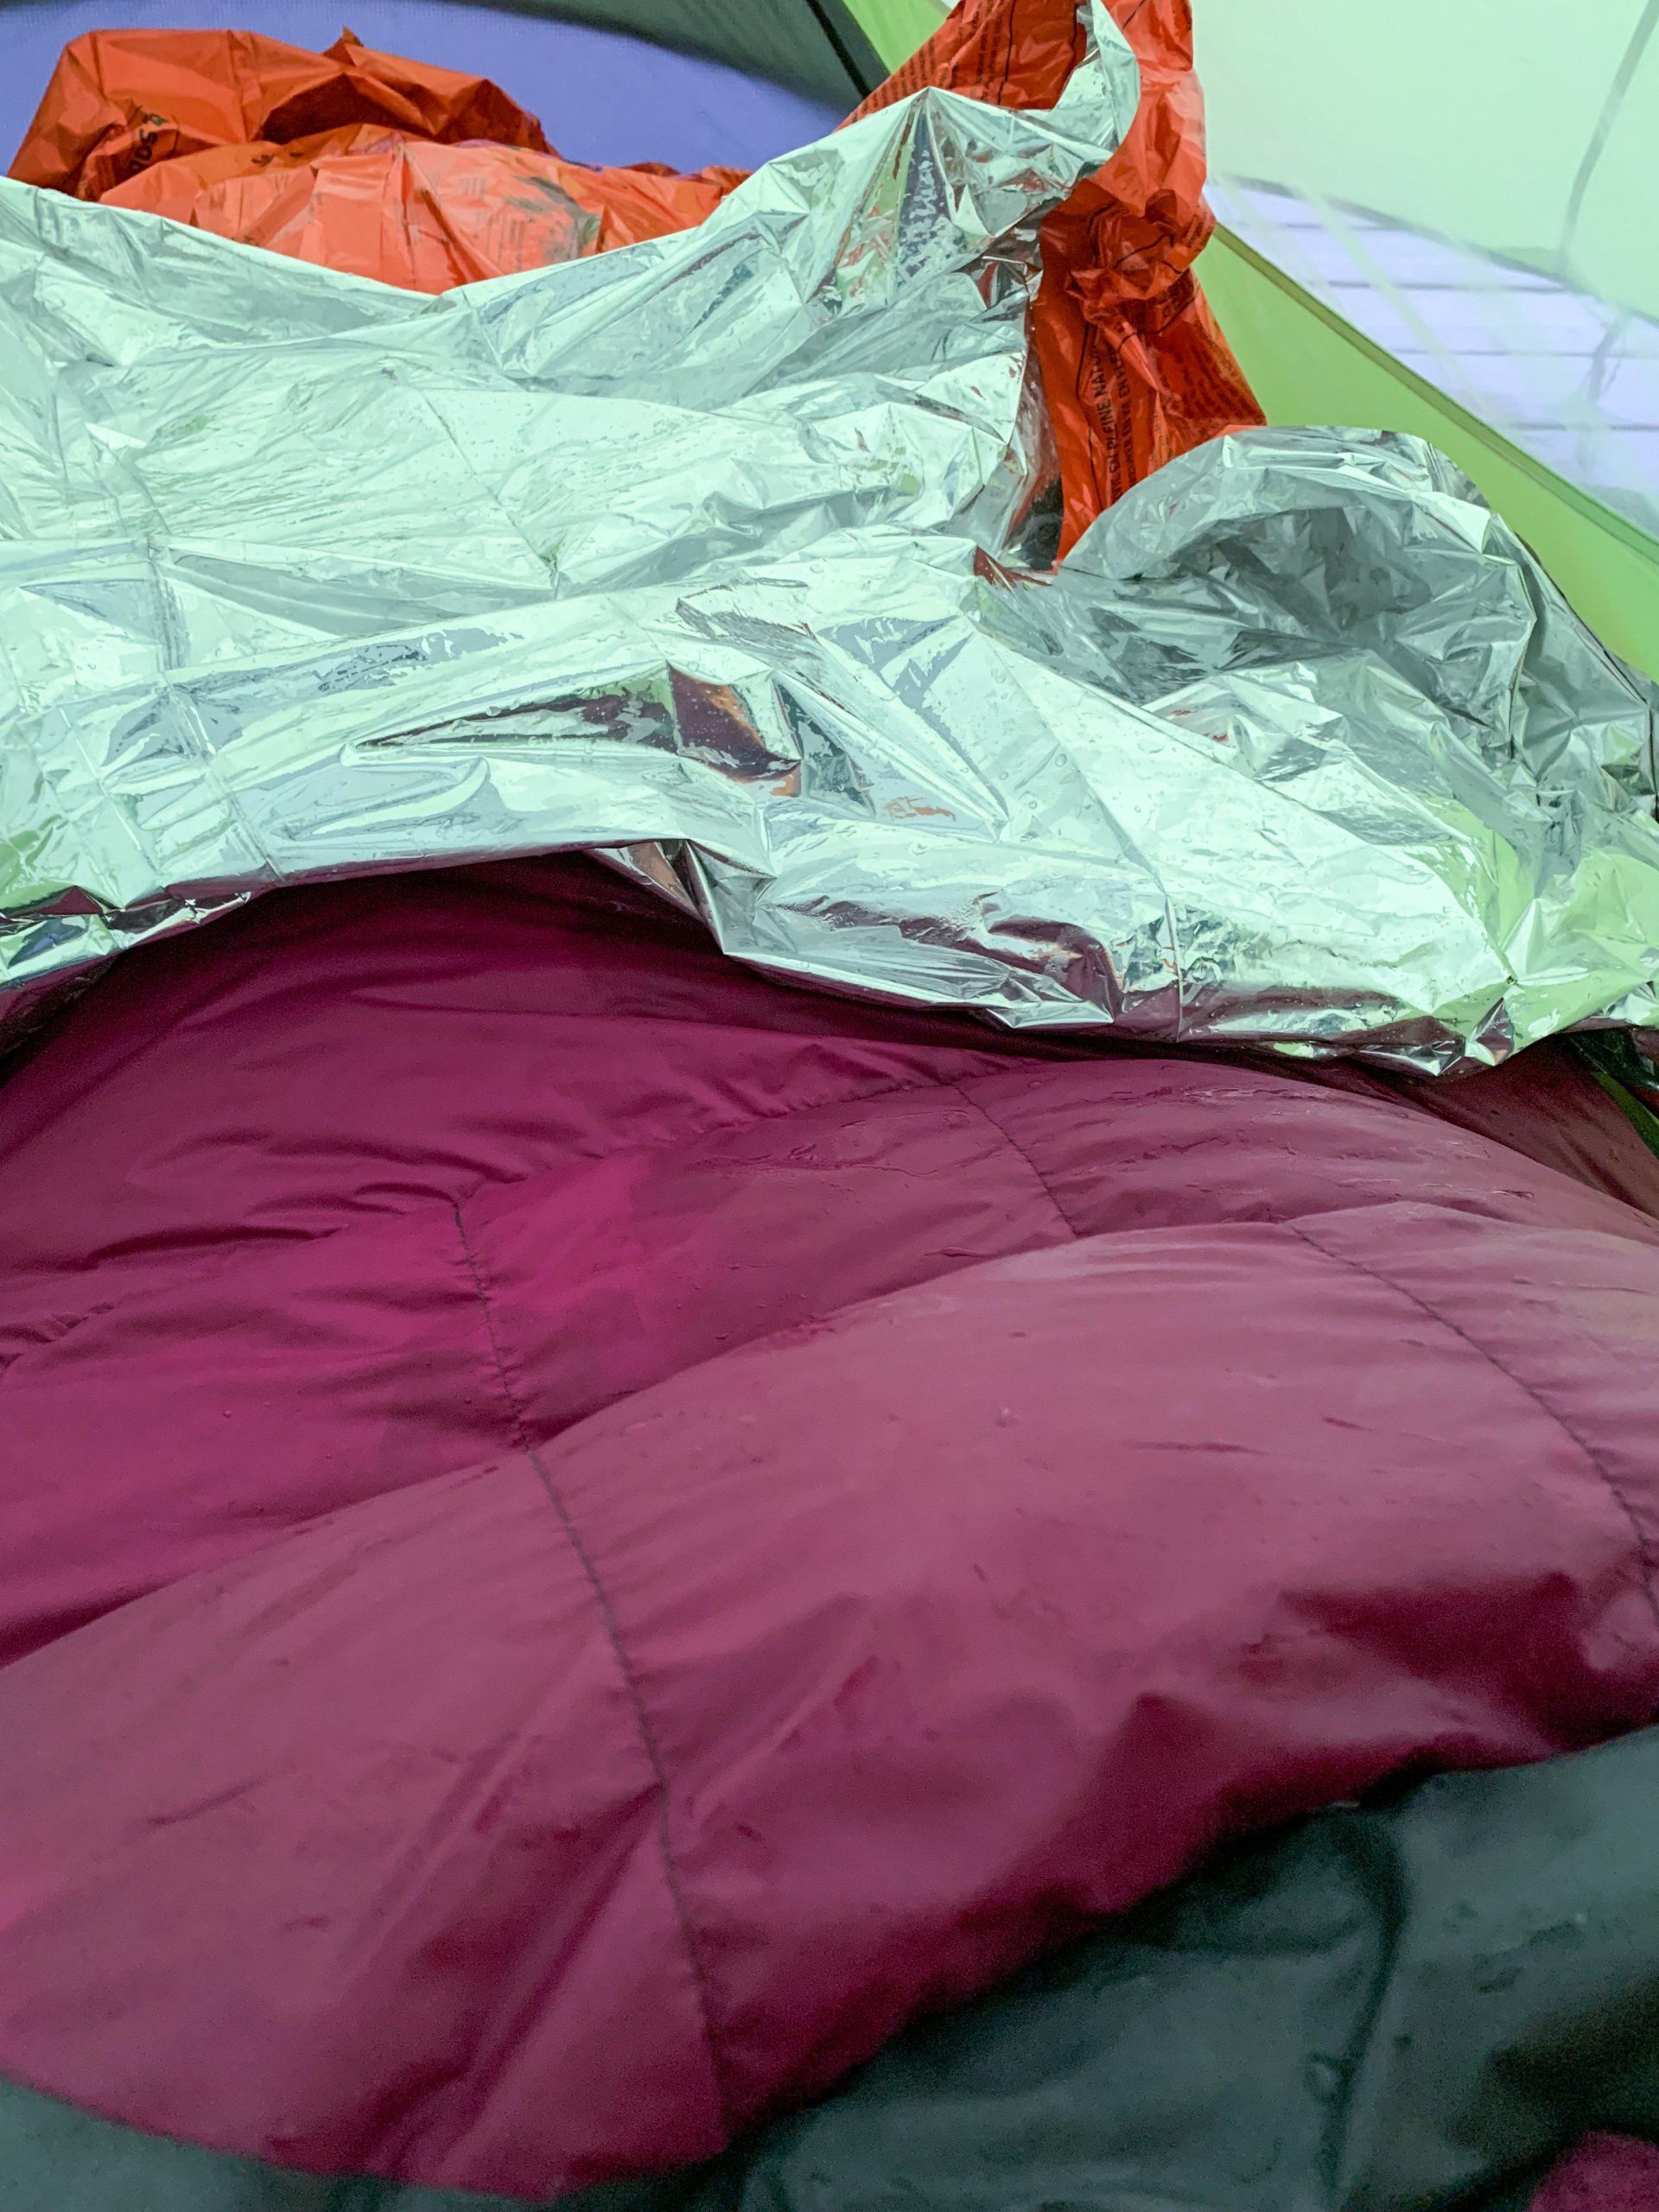 my sleeping system for backpacking - condensation on the sleeping pag from using emergency blanket